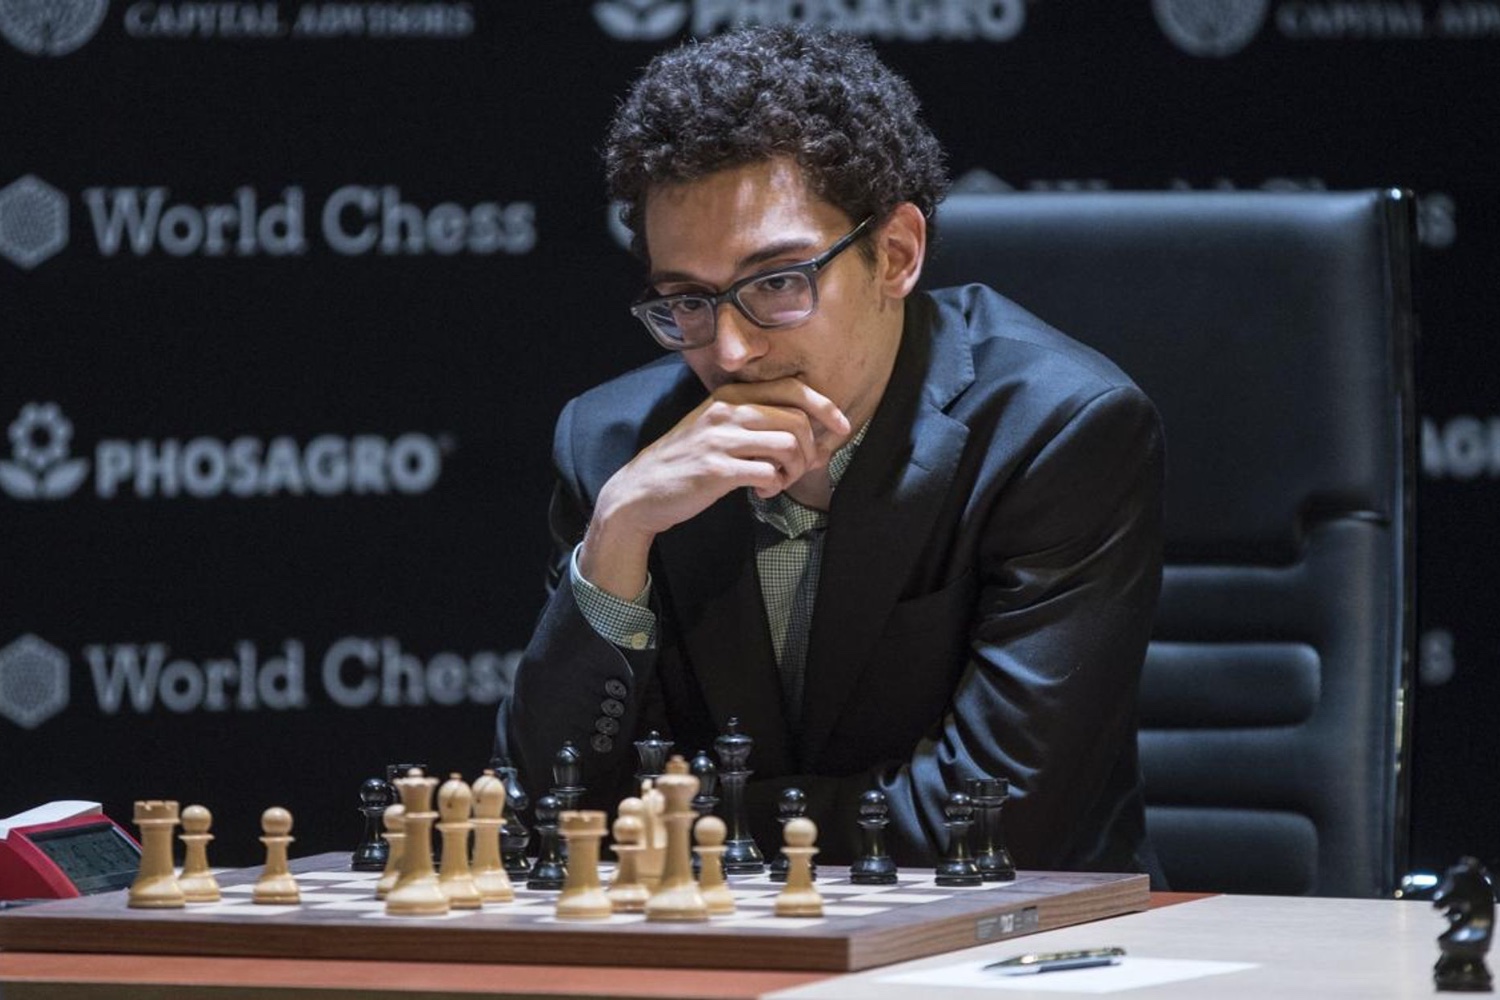 Chess tournament players burn up to 6,000 calories a day